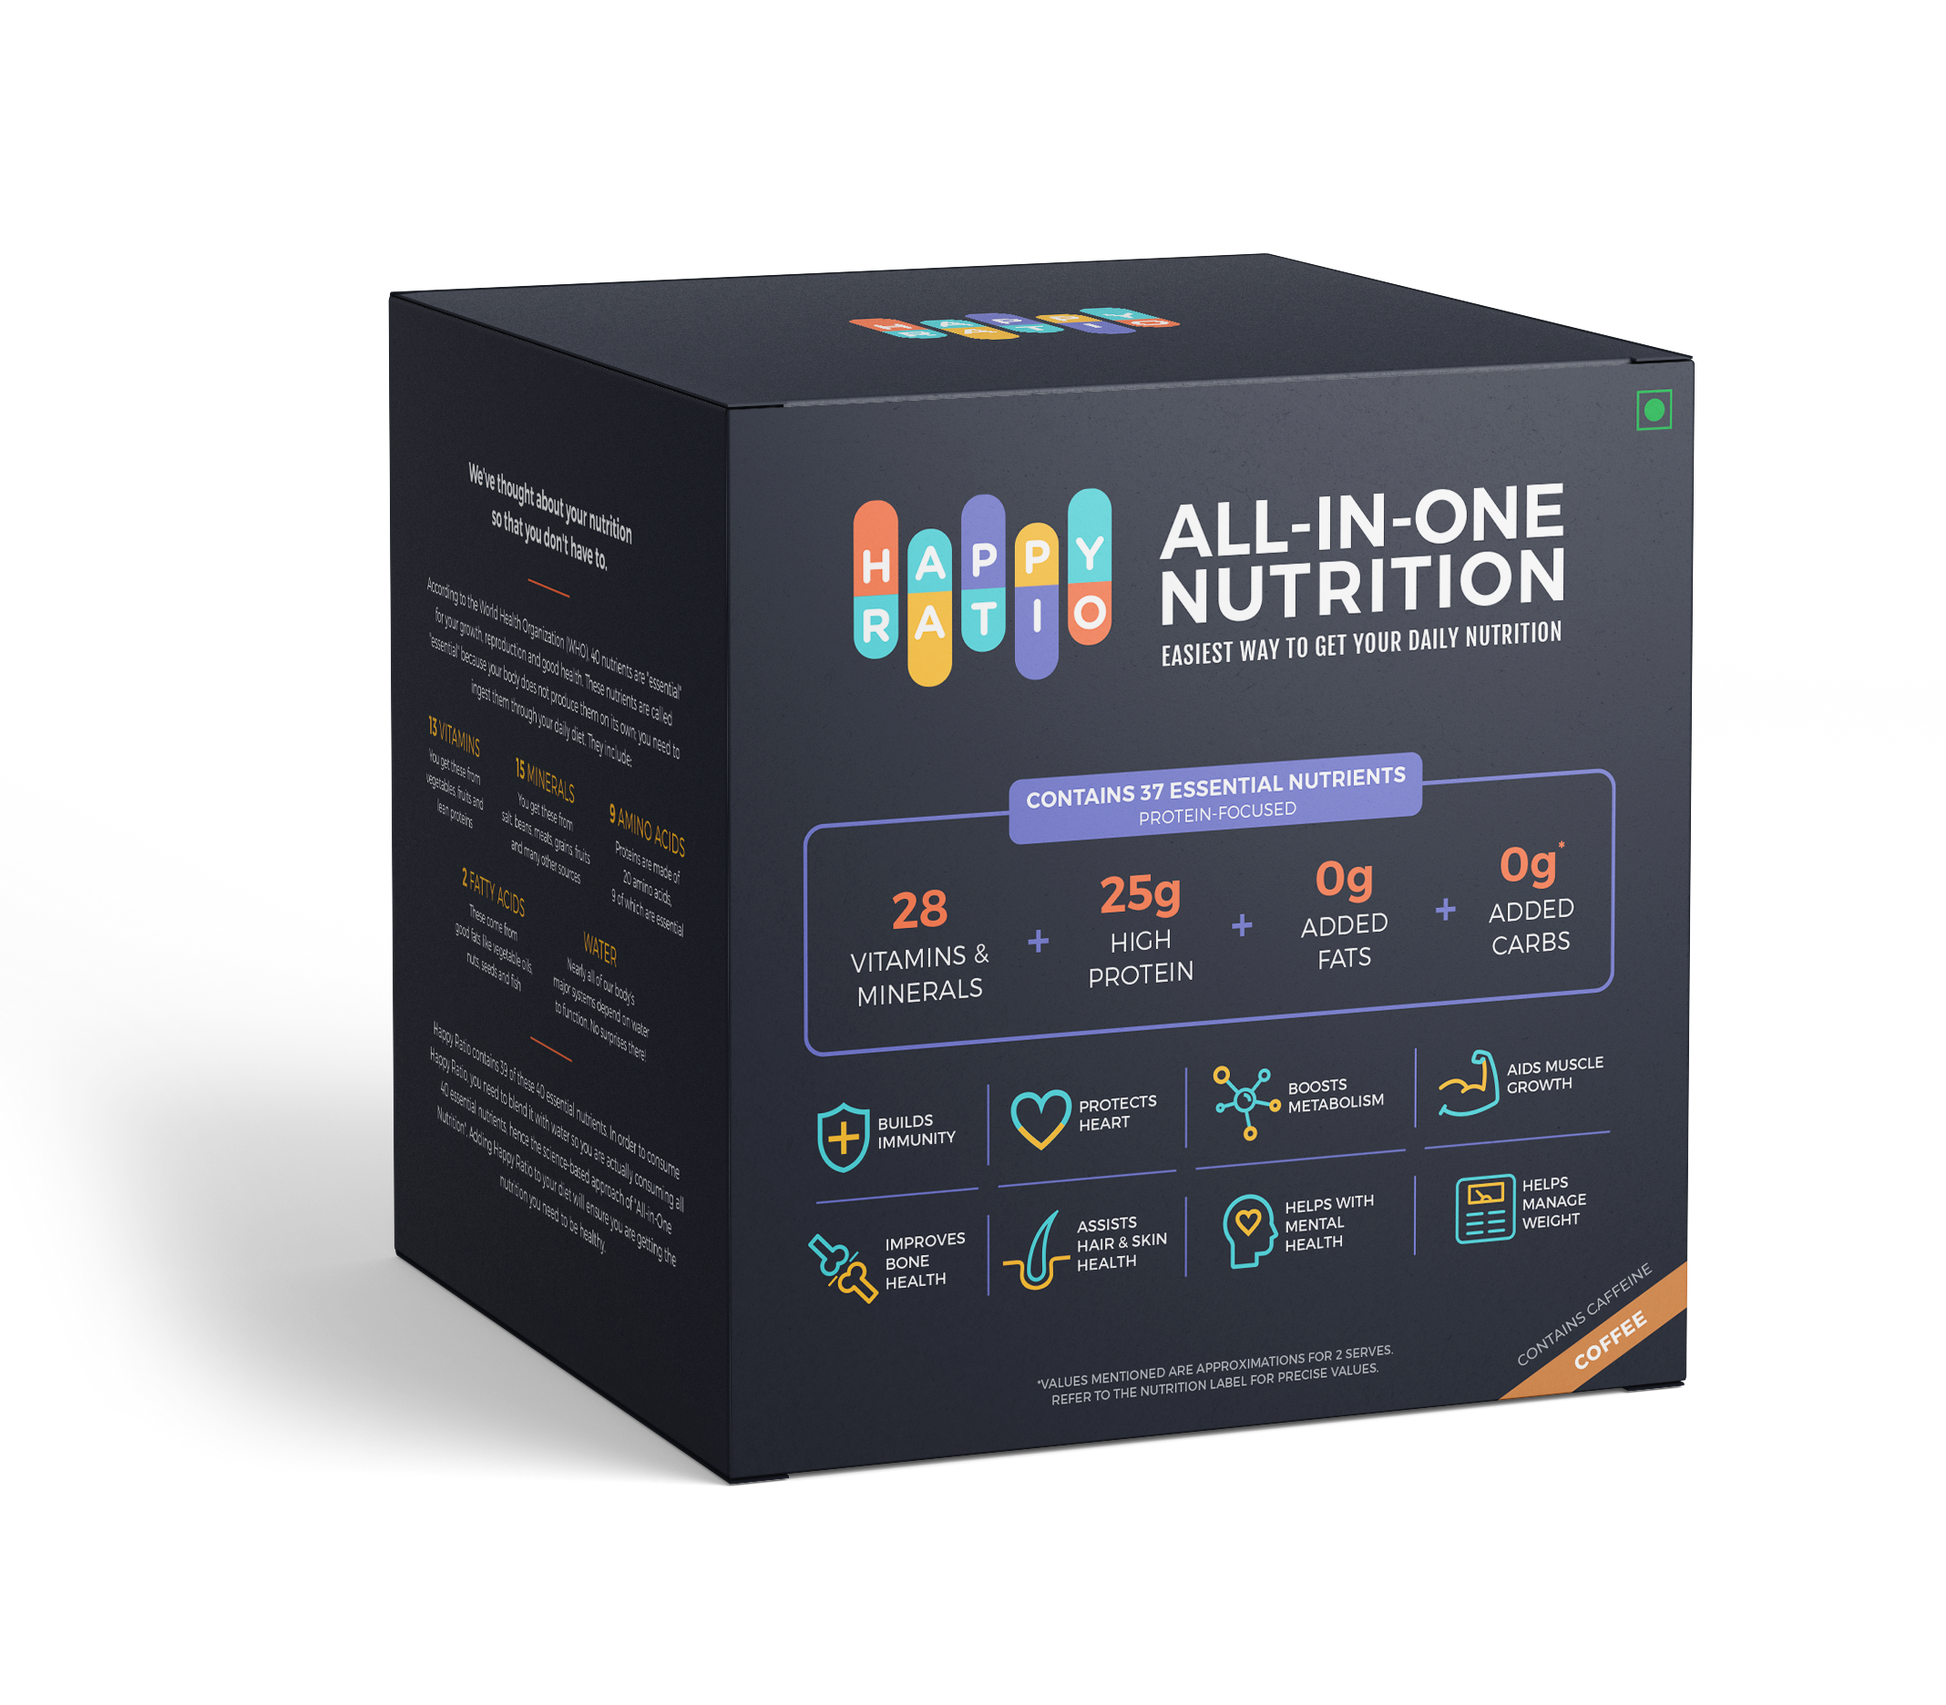 Protein-Focus (500g/box OR 14 servings) - Happy Ratio